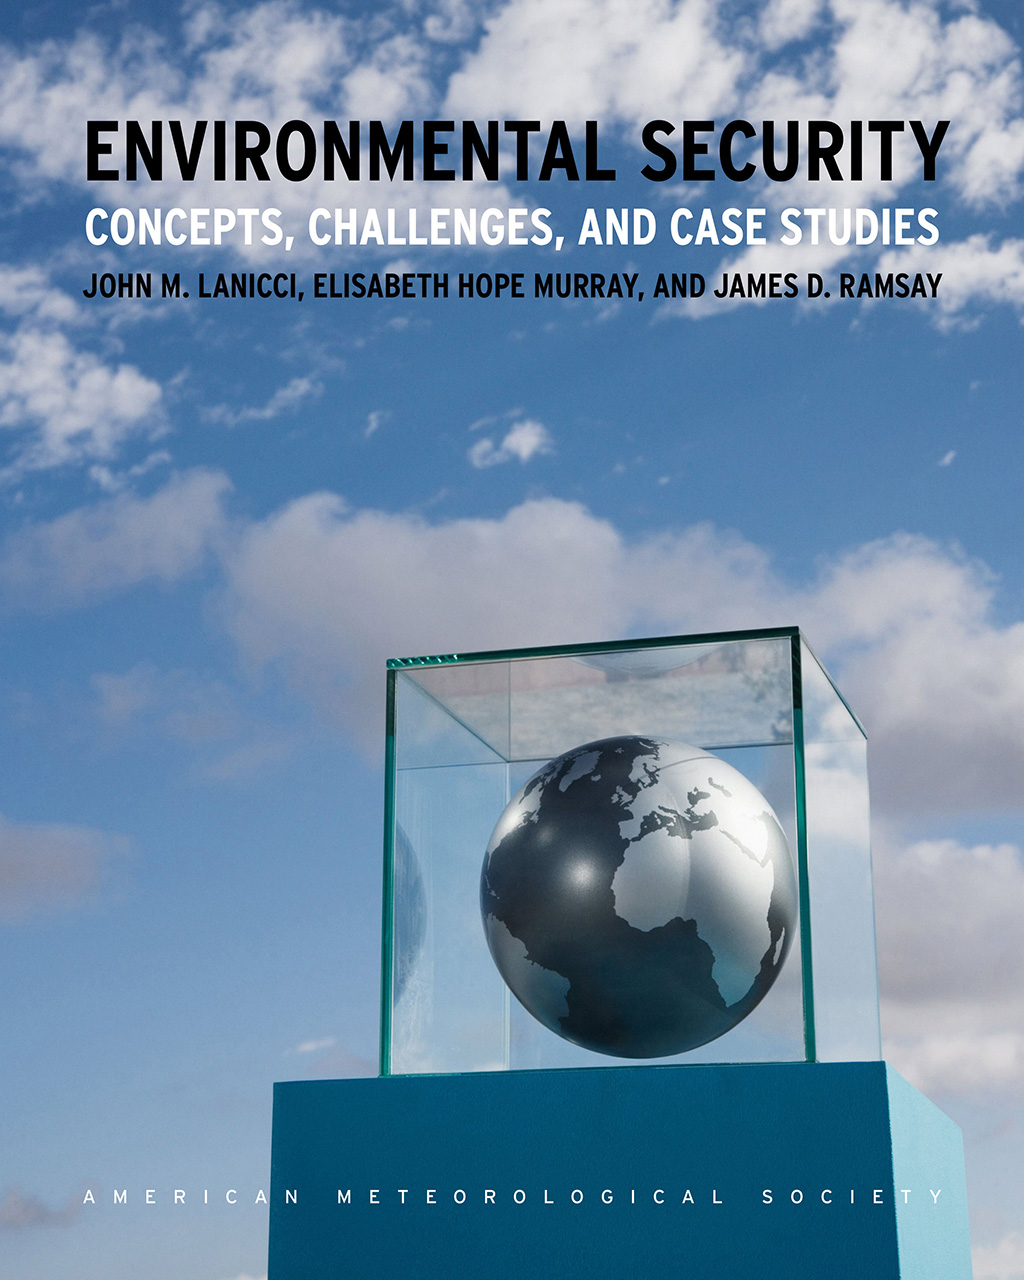 case study on environmental security